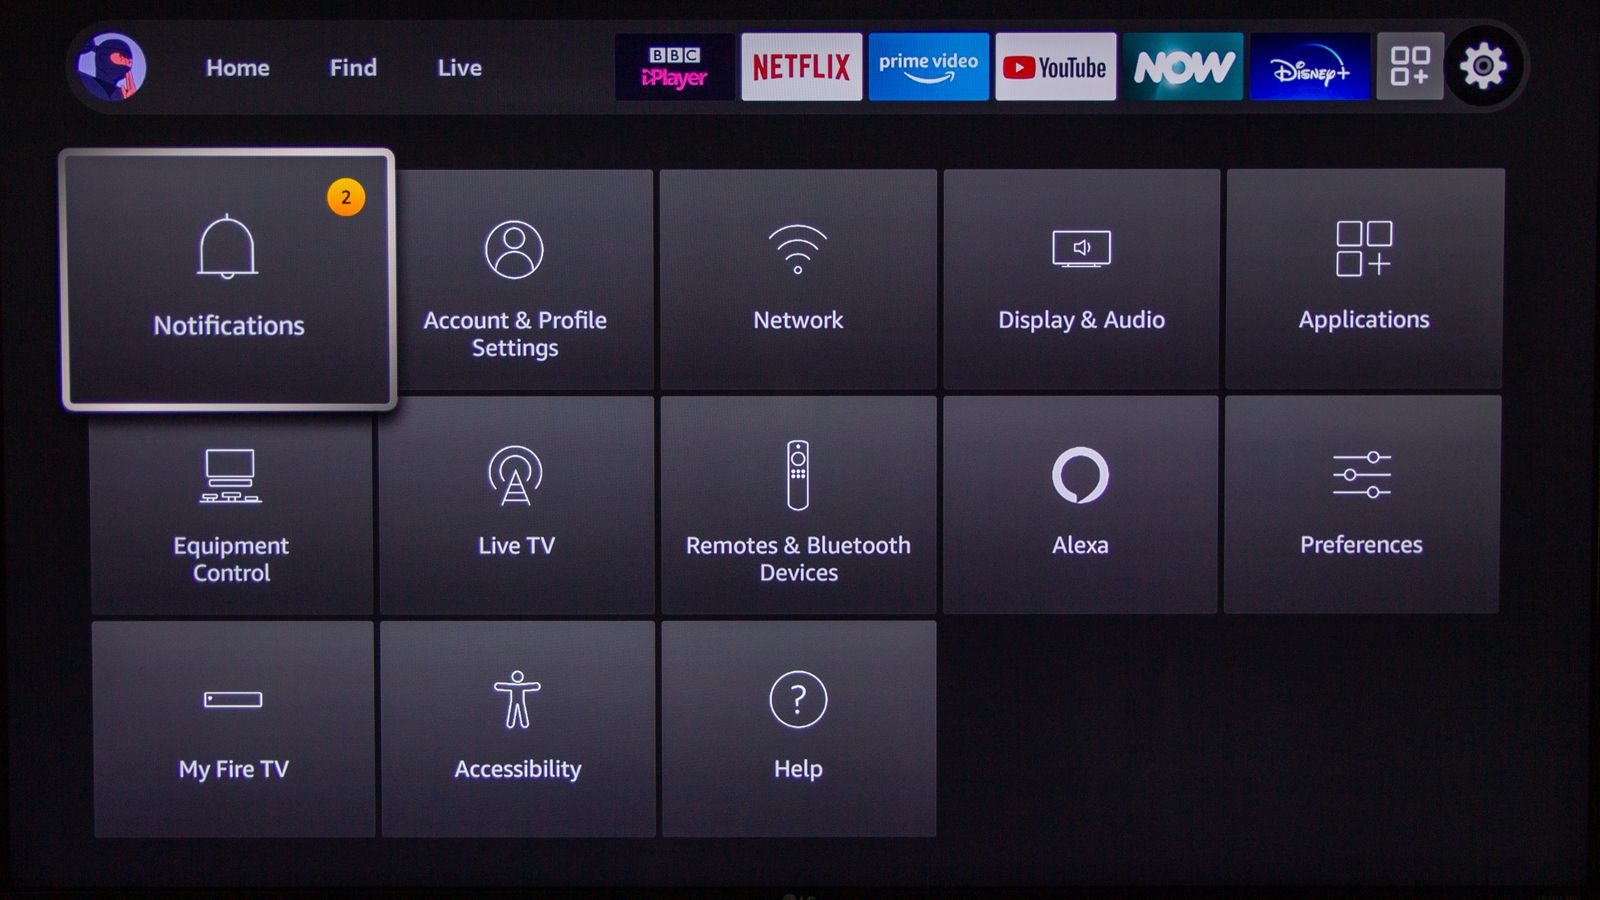 Amazon Fire Tv Tips And Tricks How To Get The Most From Your Fire Tv Stick Or 4k Box photo 6